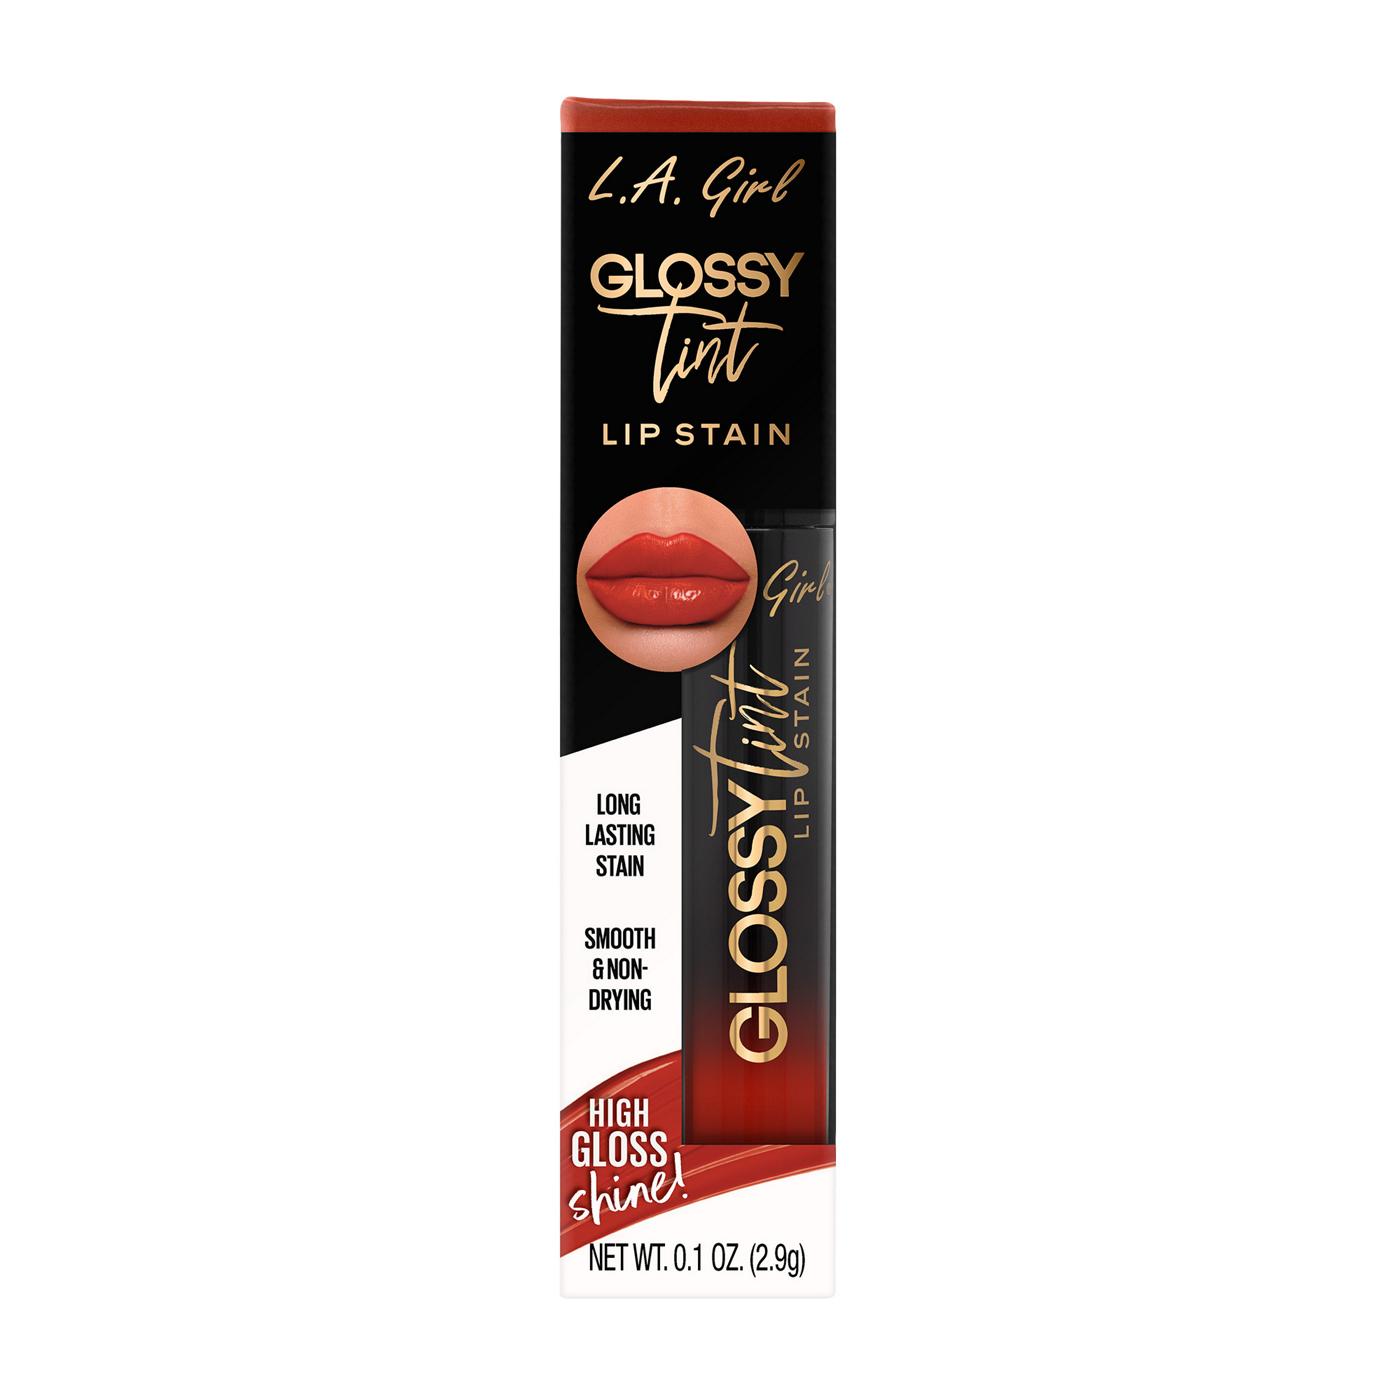 L.A. Girl Glossy Tint Lip Stain Captivating; image 1 of 2